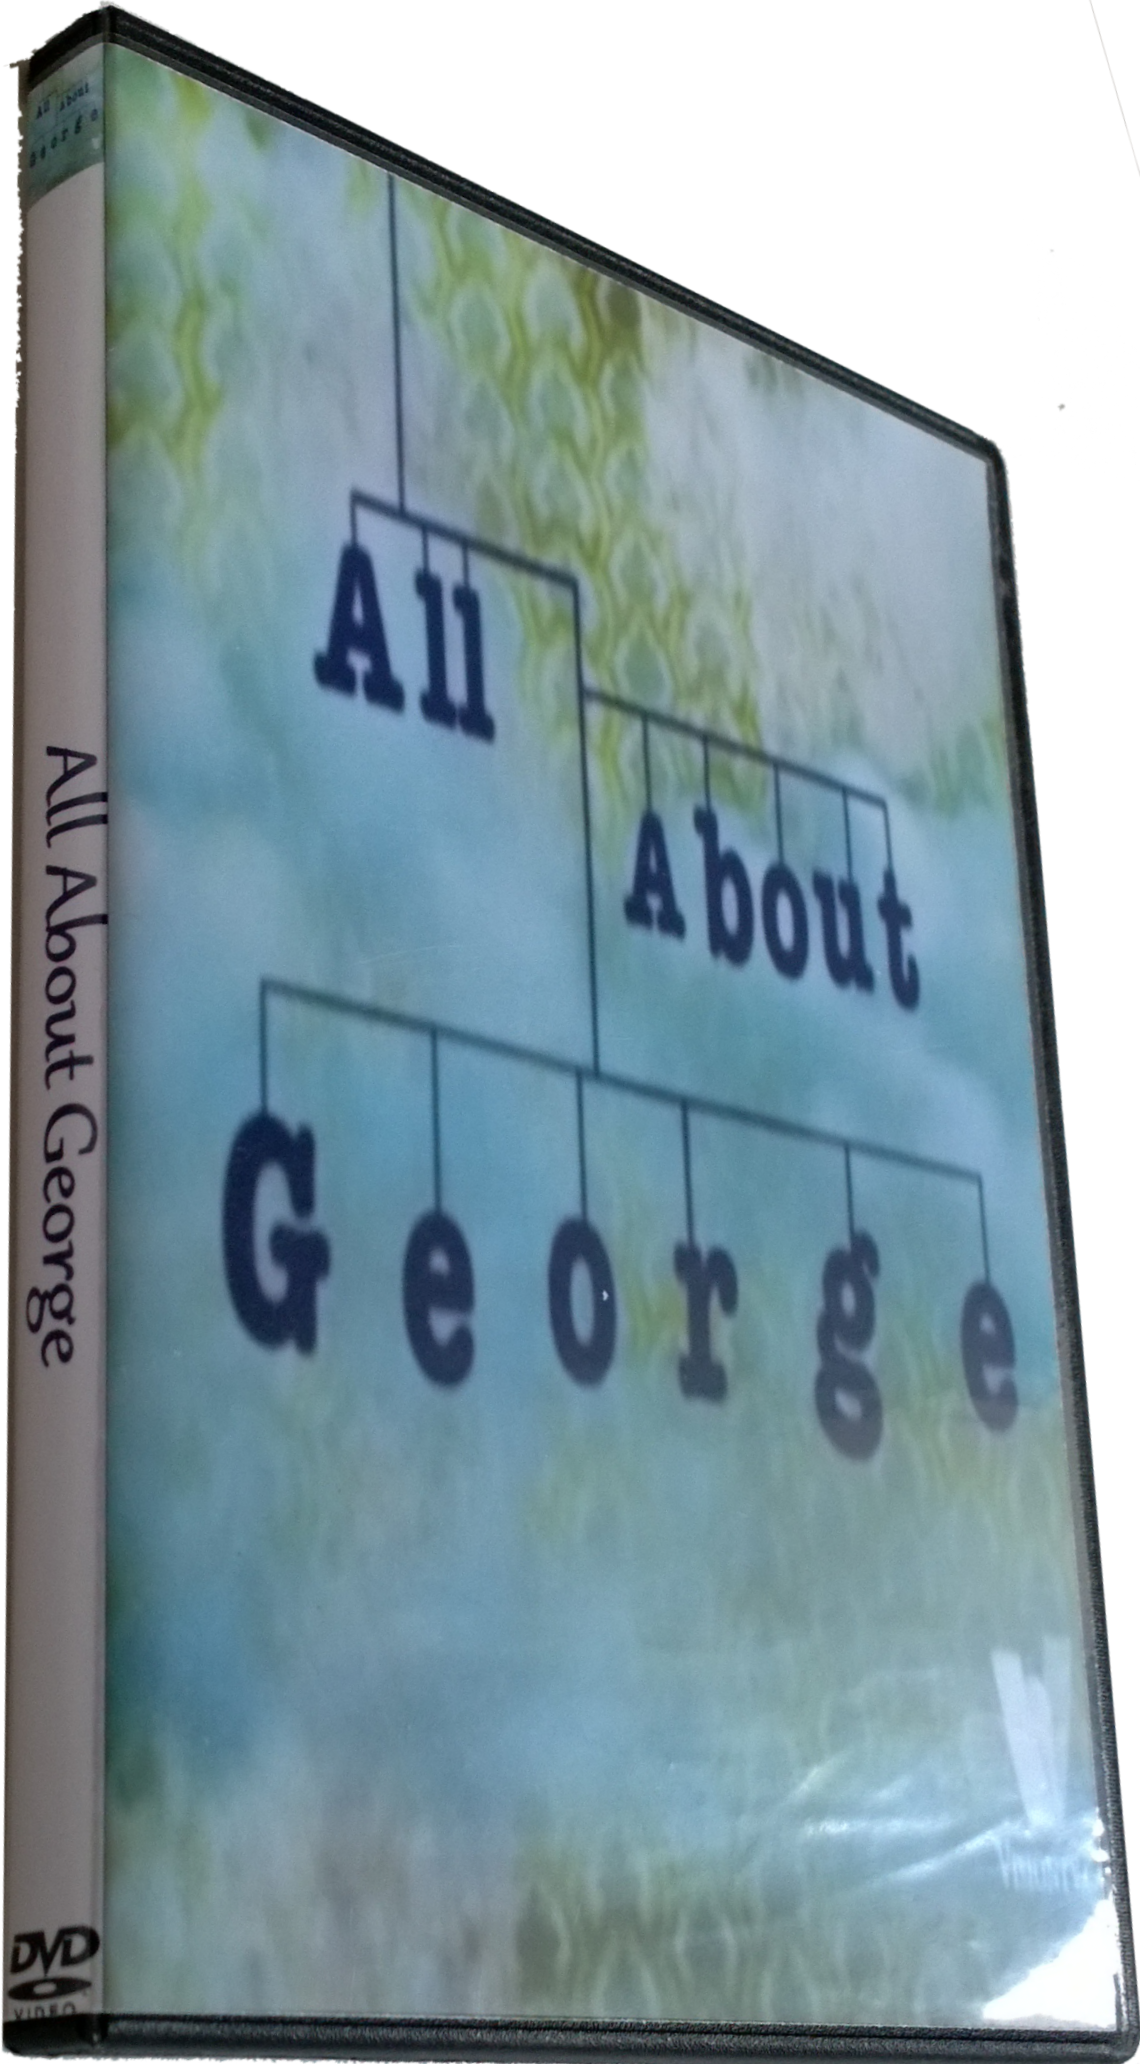 All About George (2005) TV Series DVD Rik Mayall